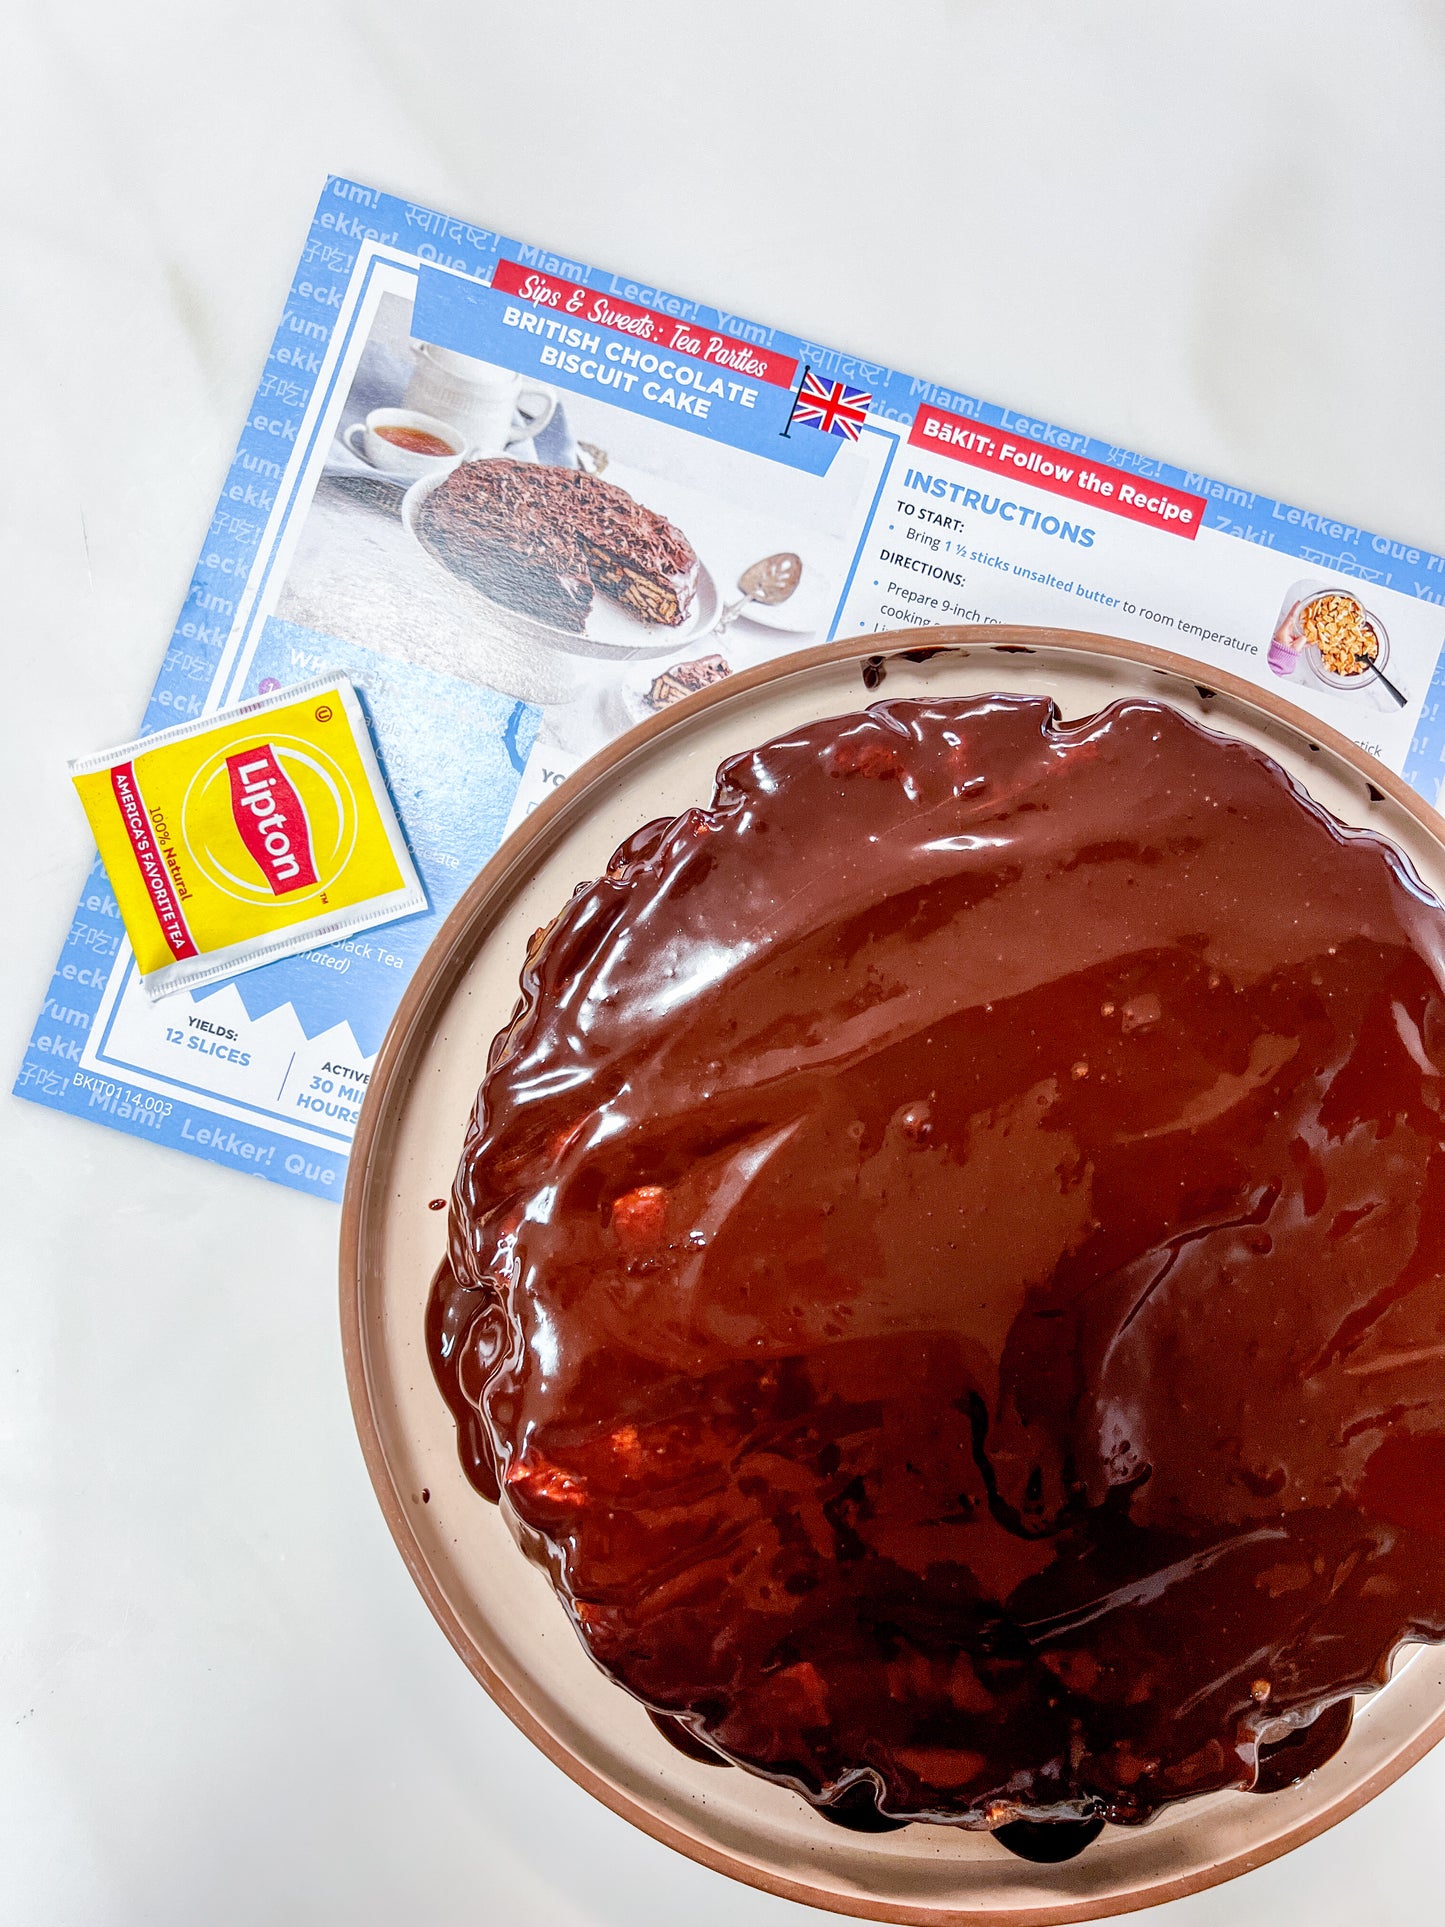 Chocolate Biscuit Cake Activity Kit